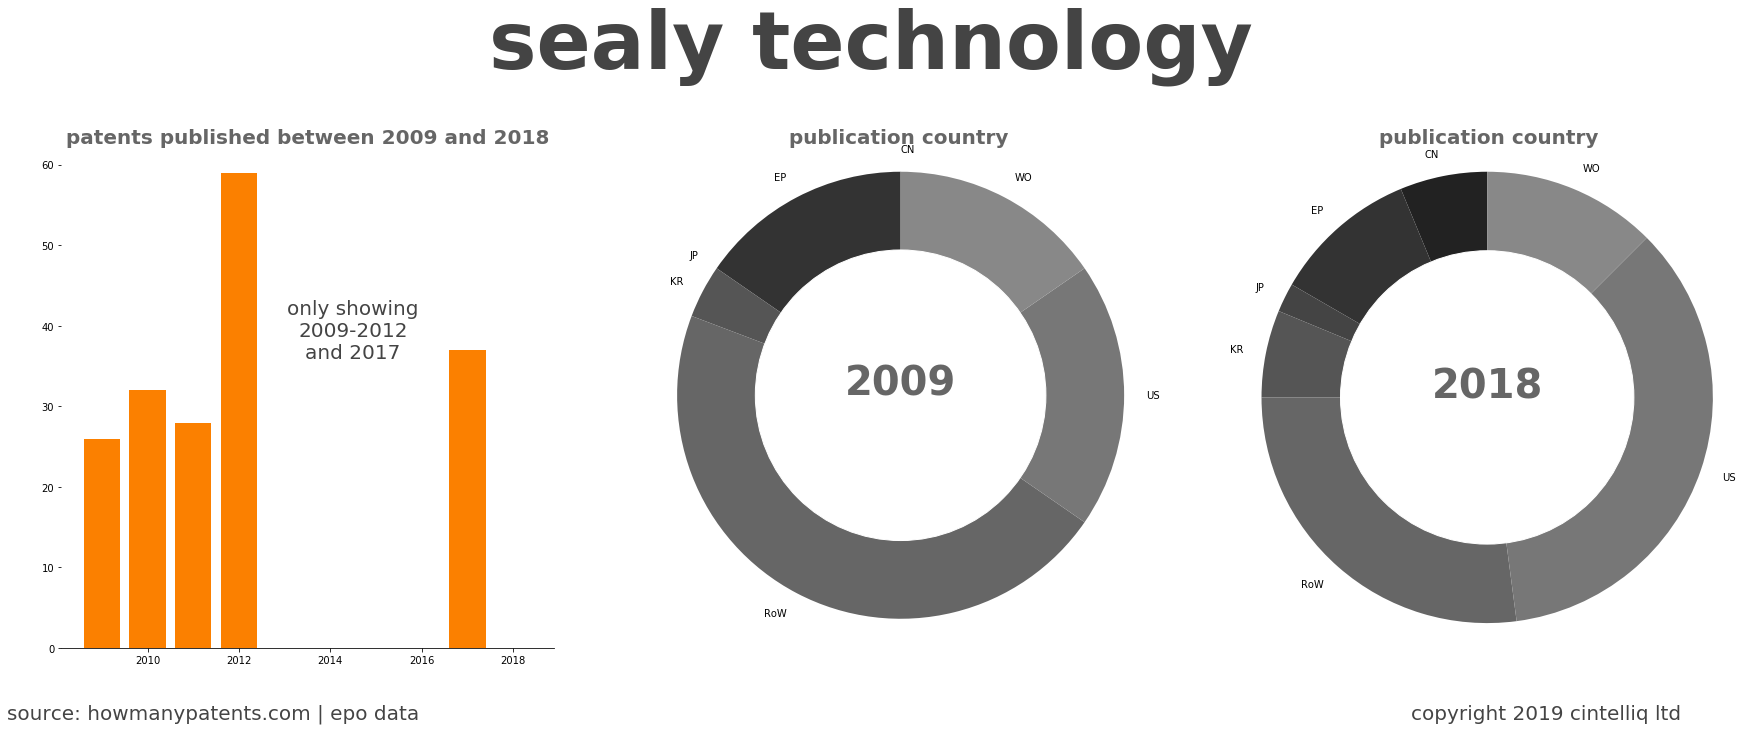 summary of patents for Sealy Technology